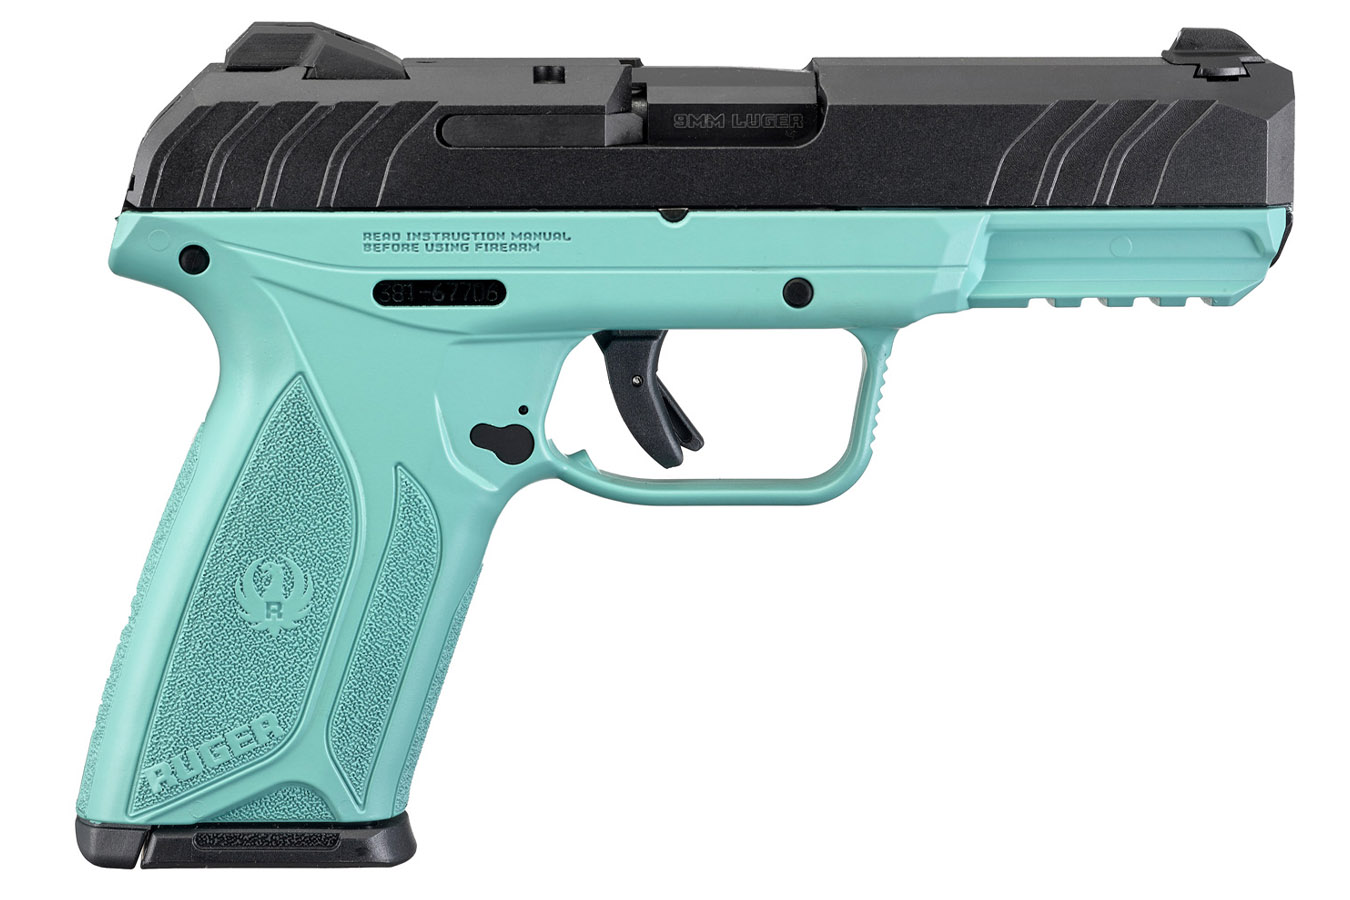 No. 15 Best Selling: RUGER SECURITY 9 COMPACT 9MM 4 IN BBL 15 RD MAG BLACK/TURQUOISE